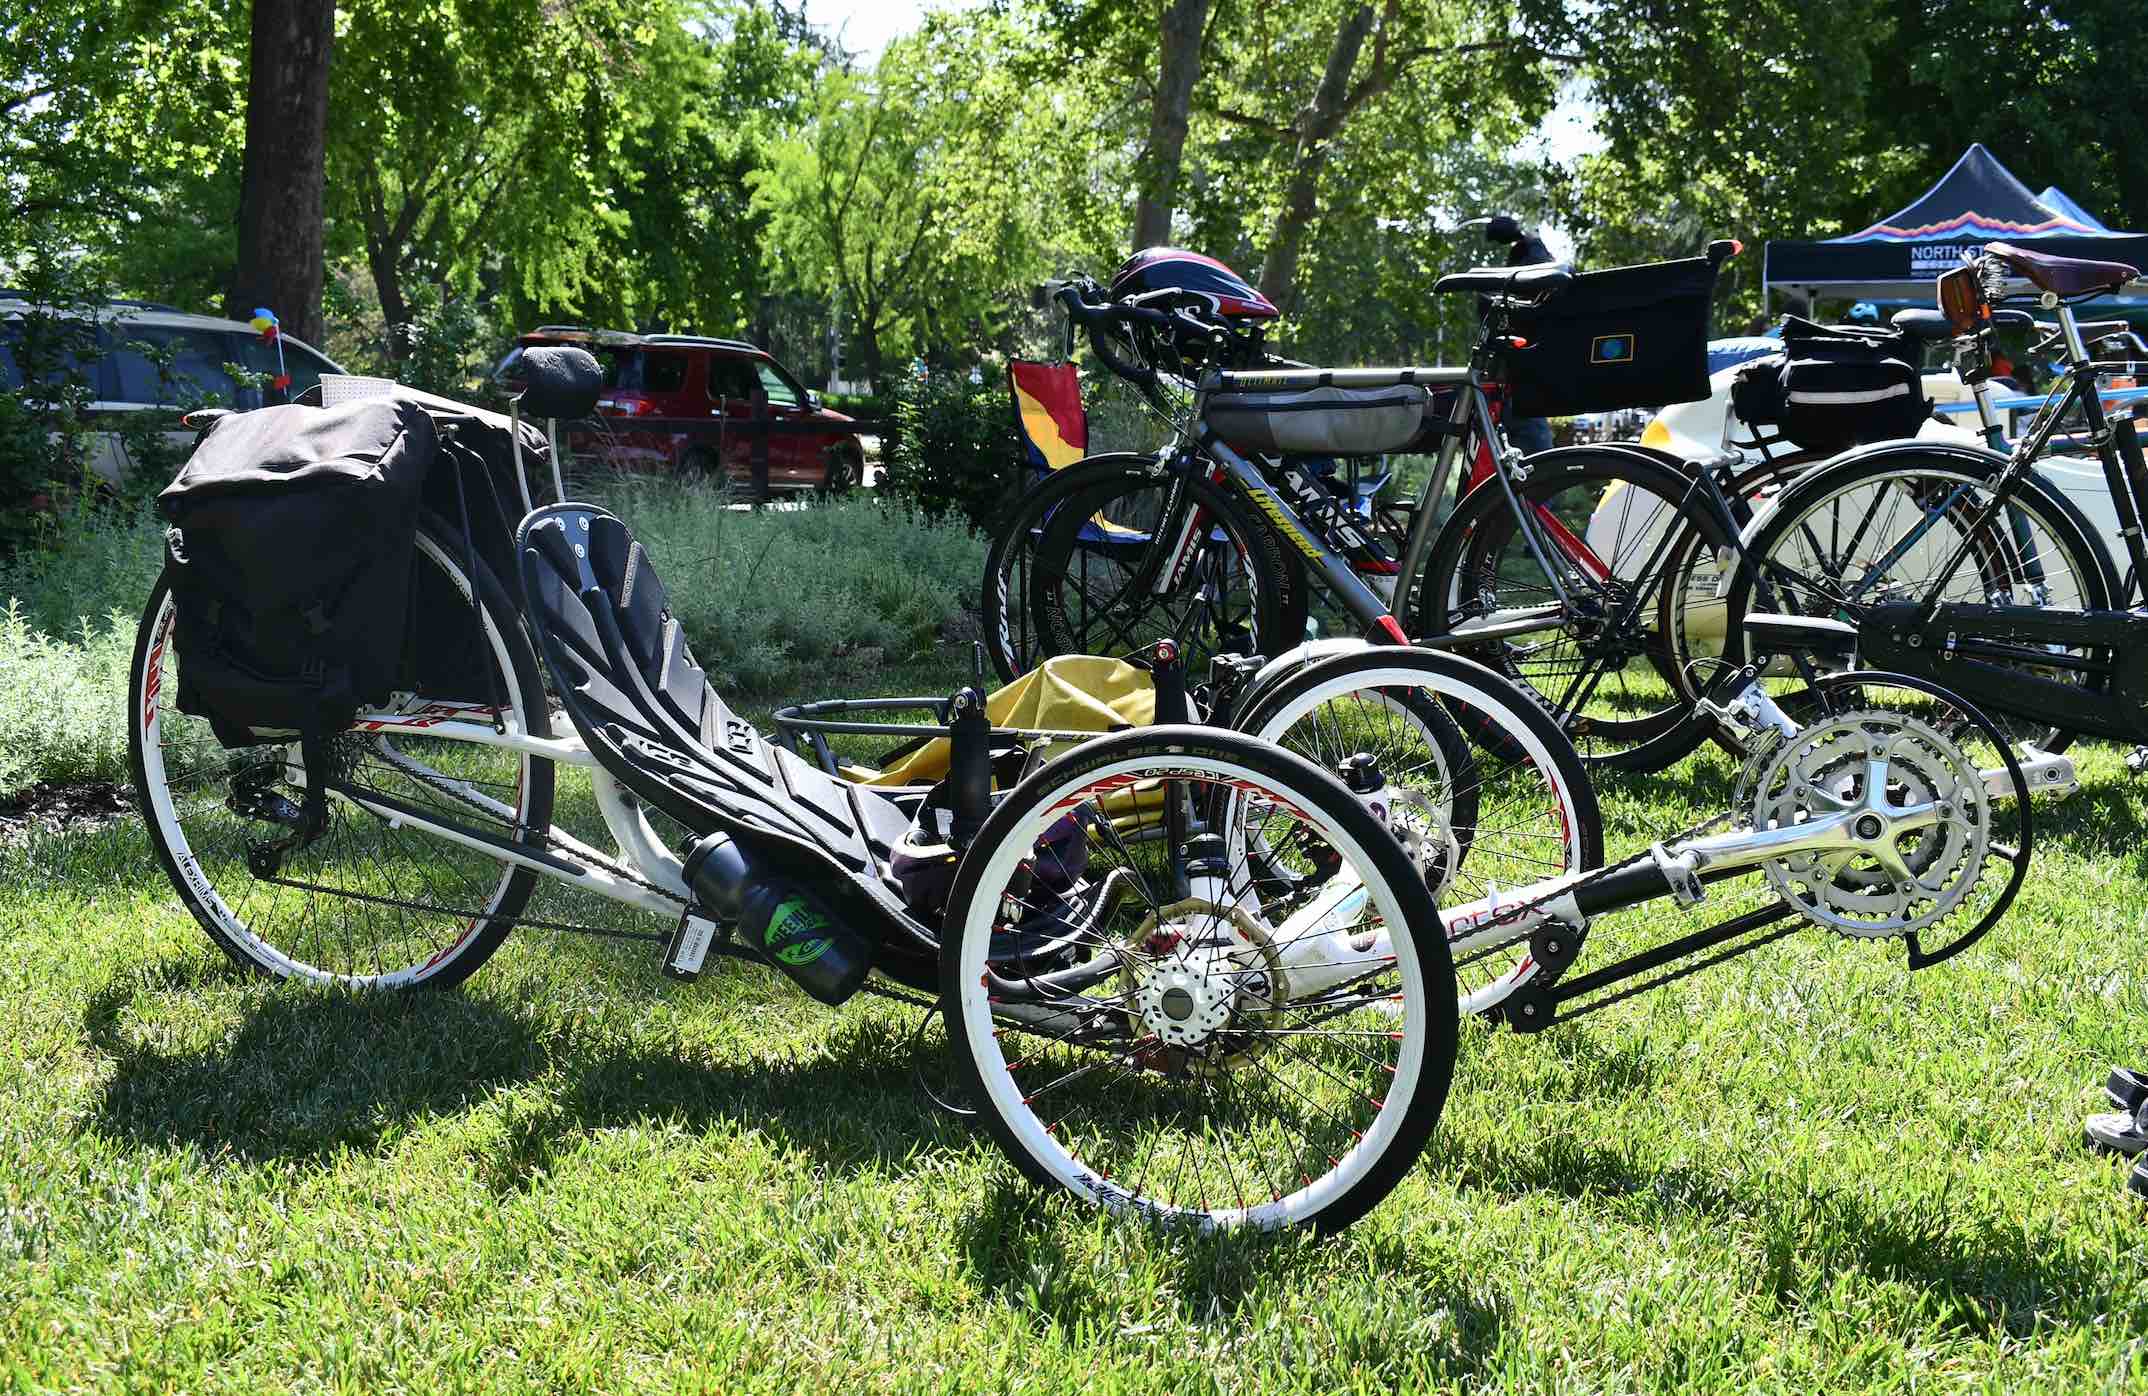 Several bikes propped on grass, the front one has a dropped seat for riding low